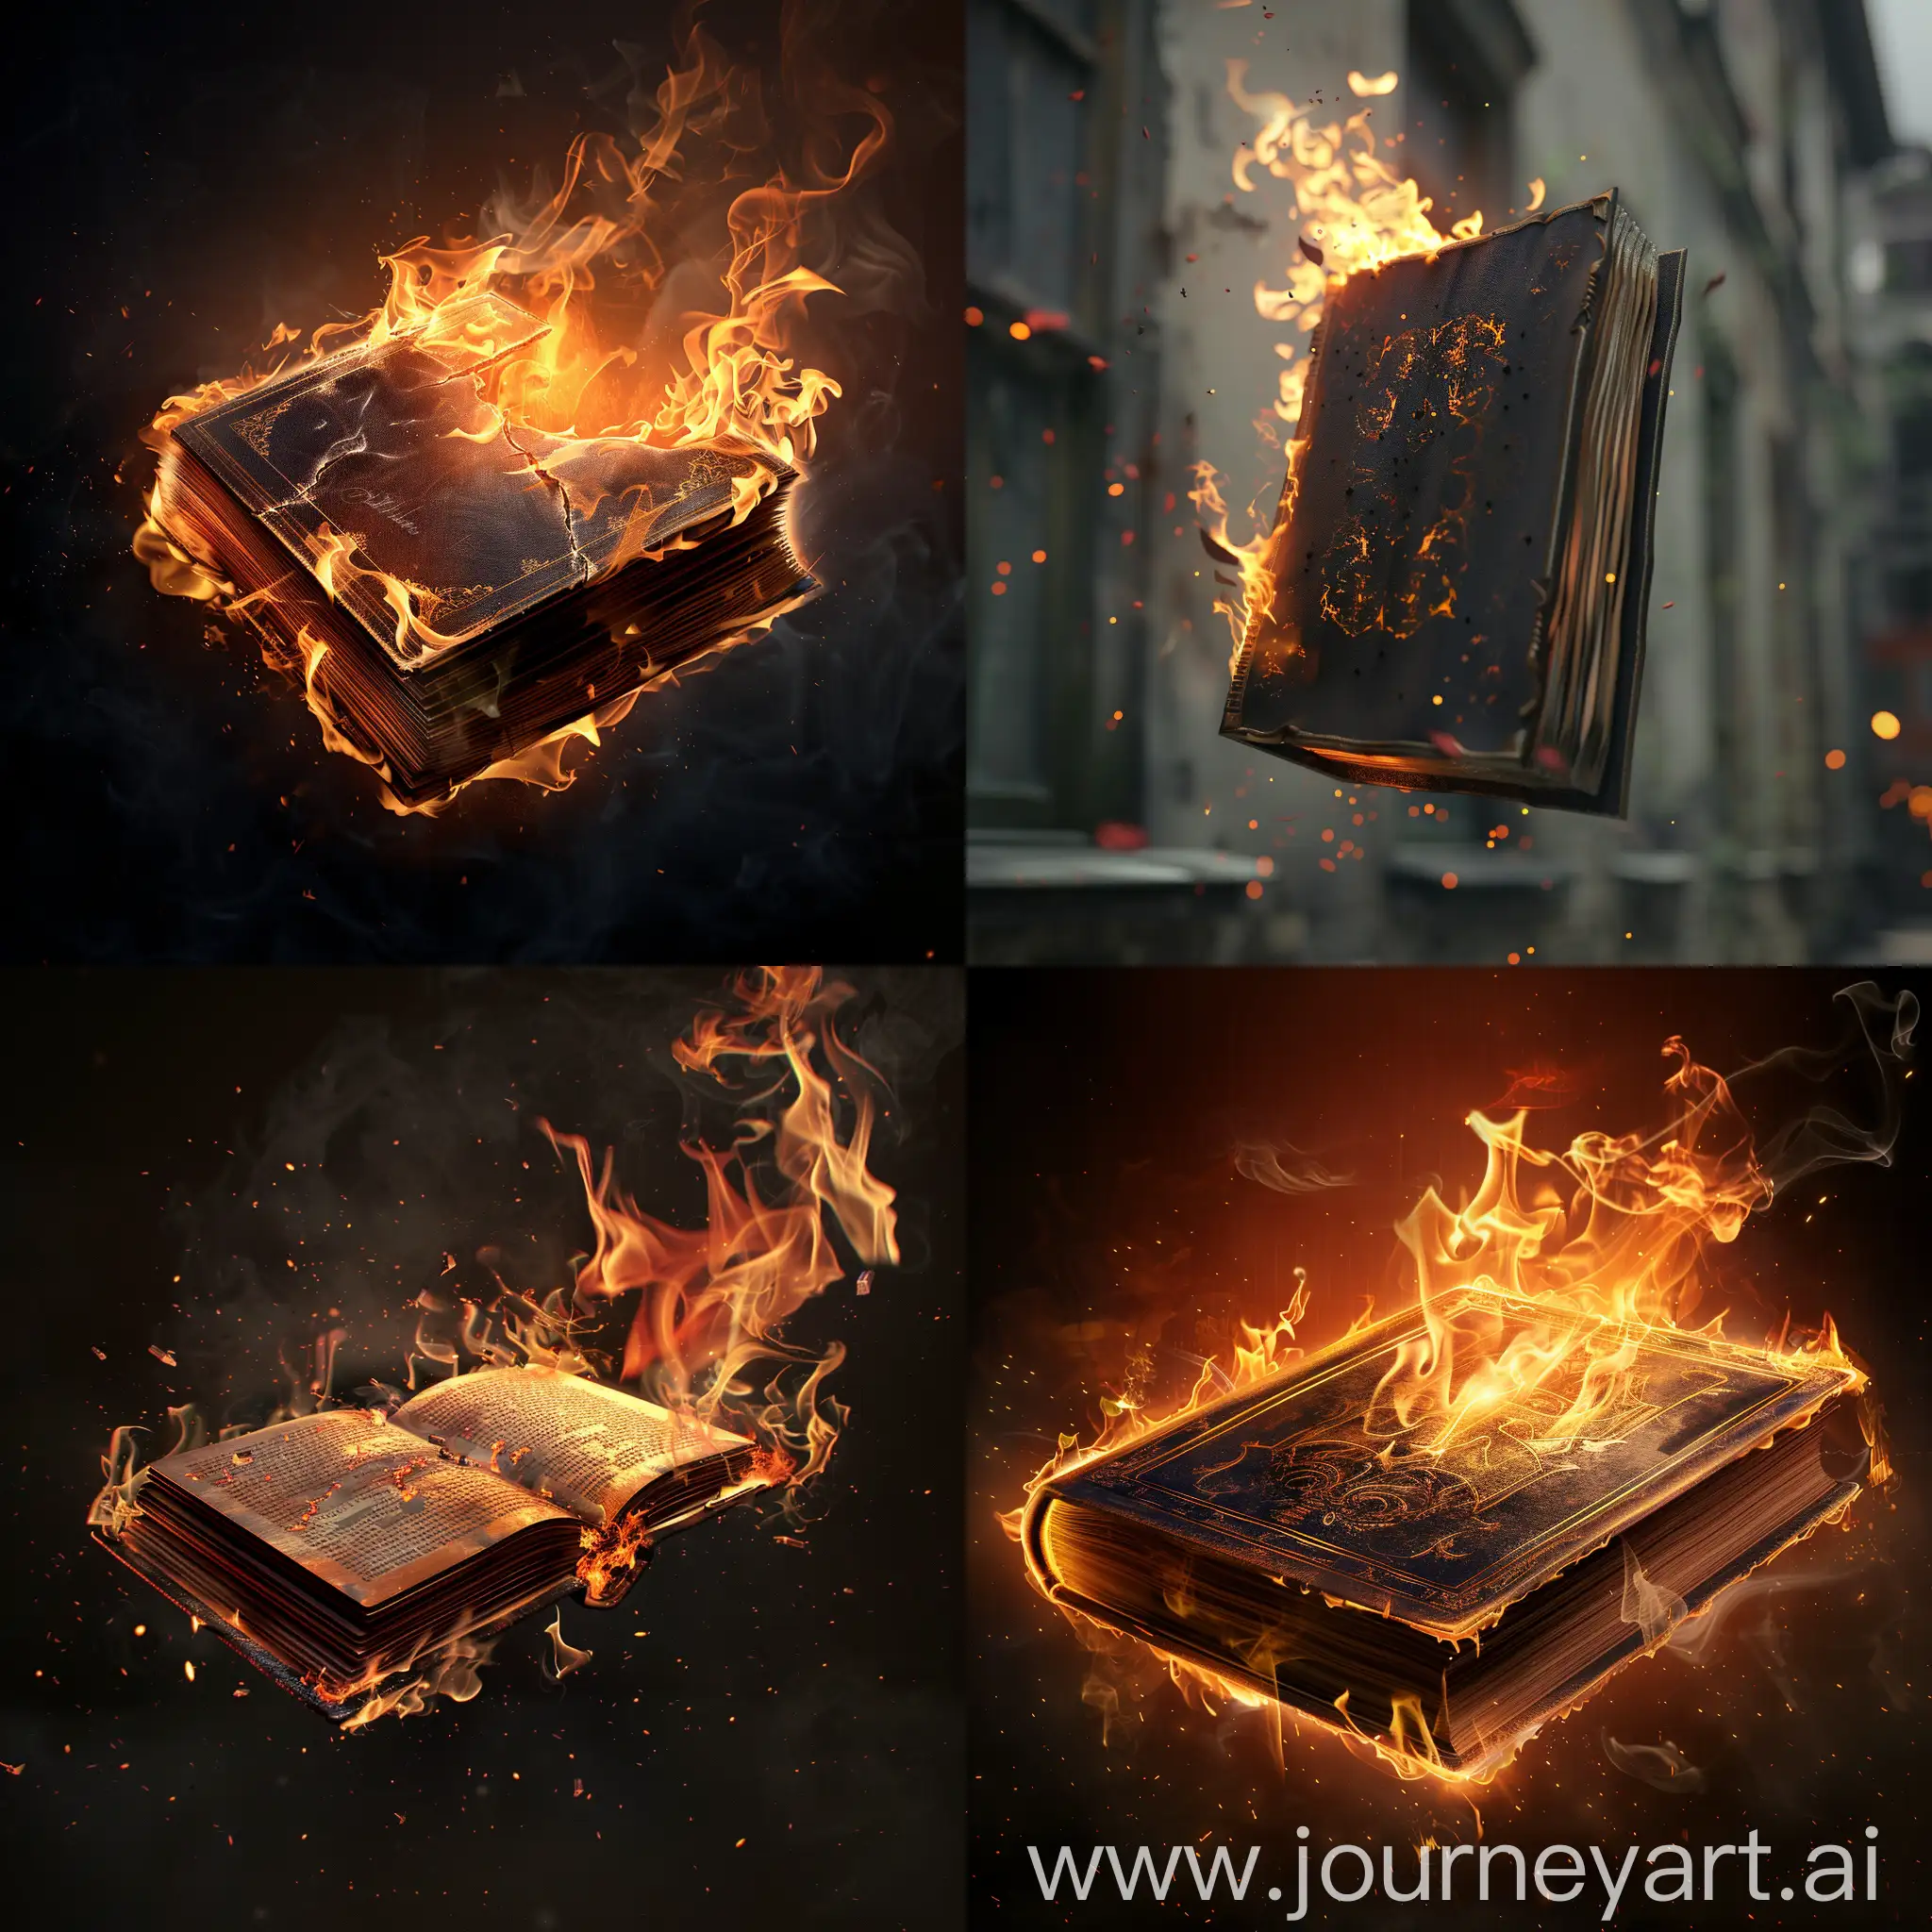 Flying-Burning-Book-in-Photorealistic-Style